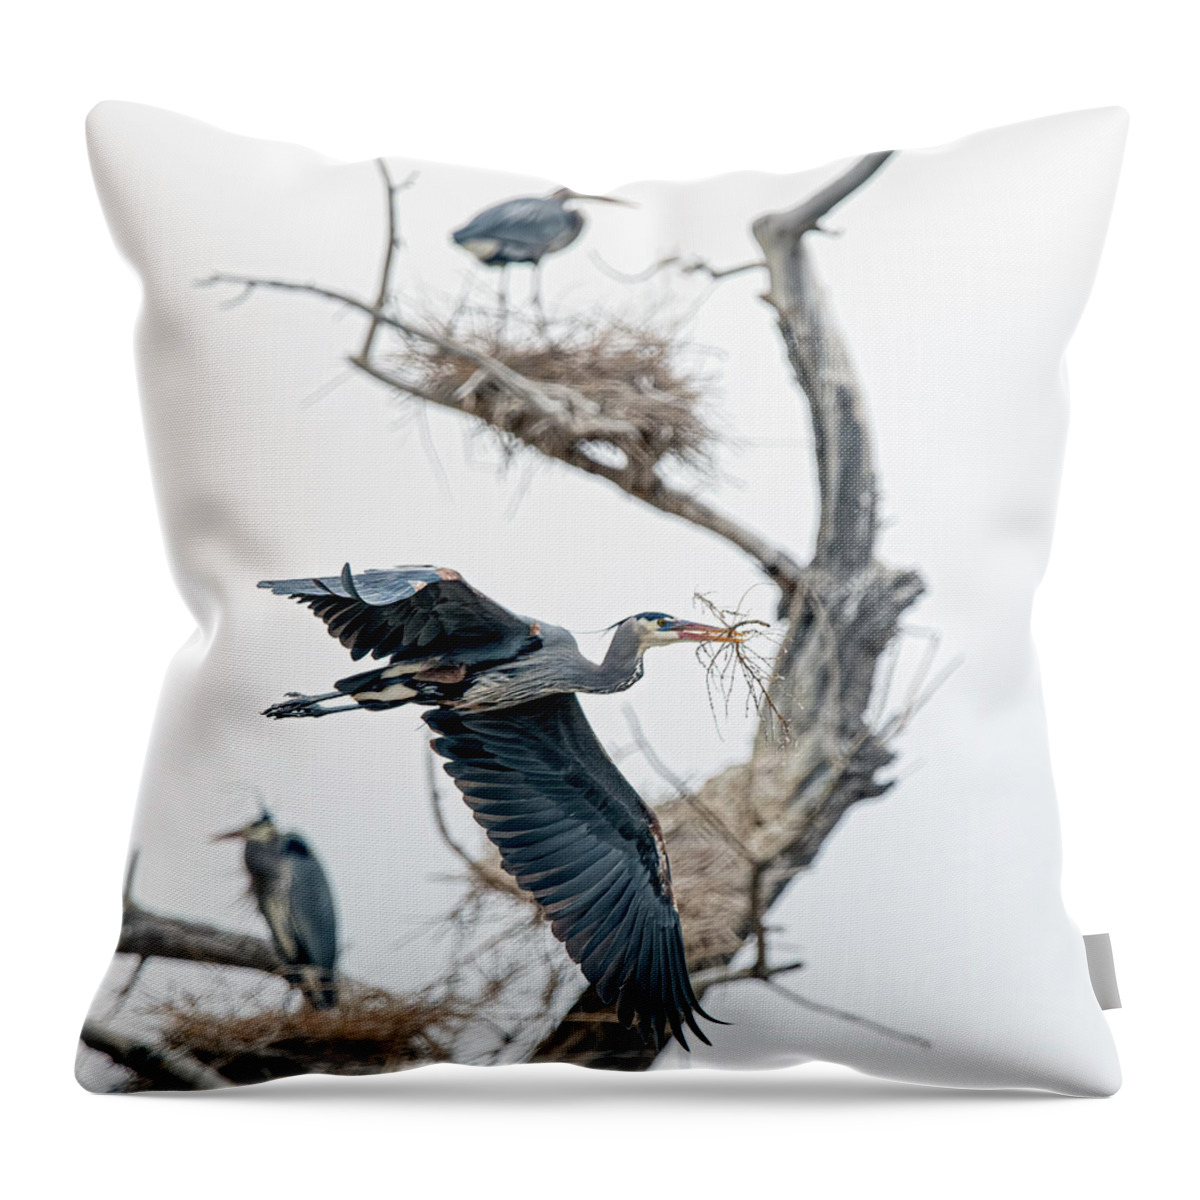 Stillwater Wildlife Refuge Throw Pillow featuring the photograph Great Blue Heron 5 by Rick Mosher